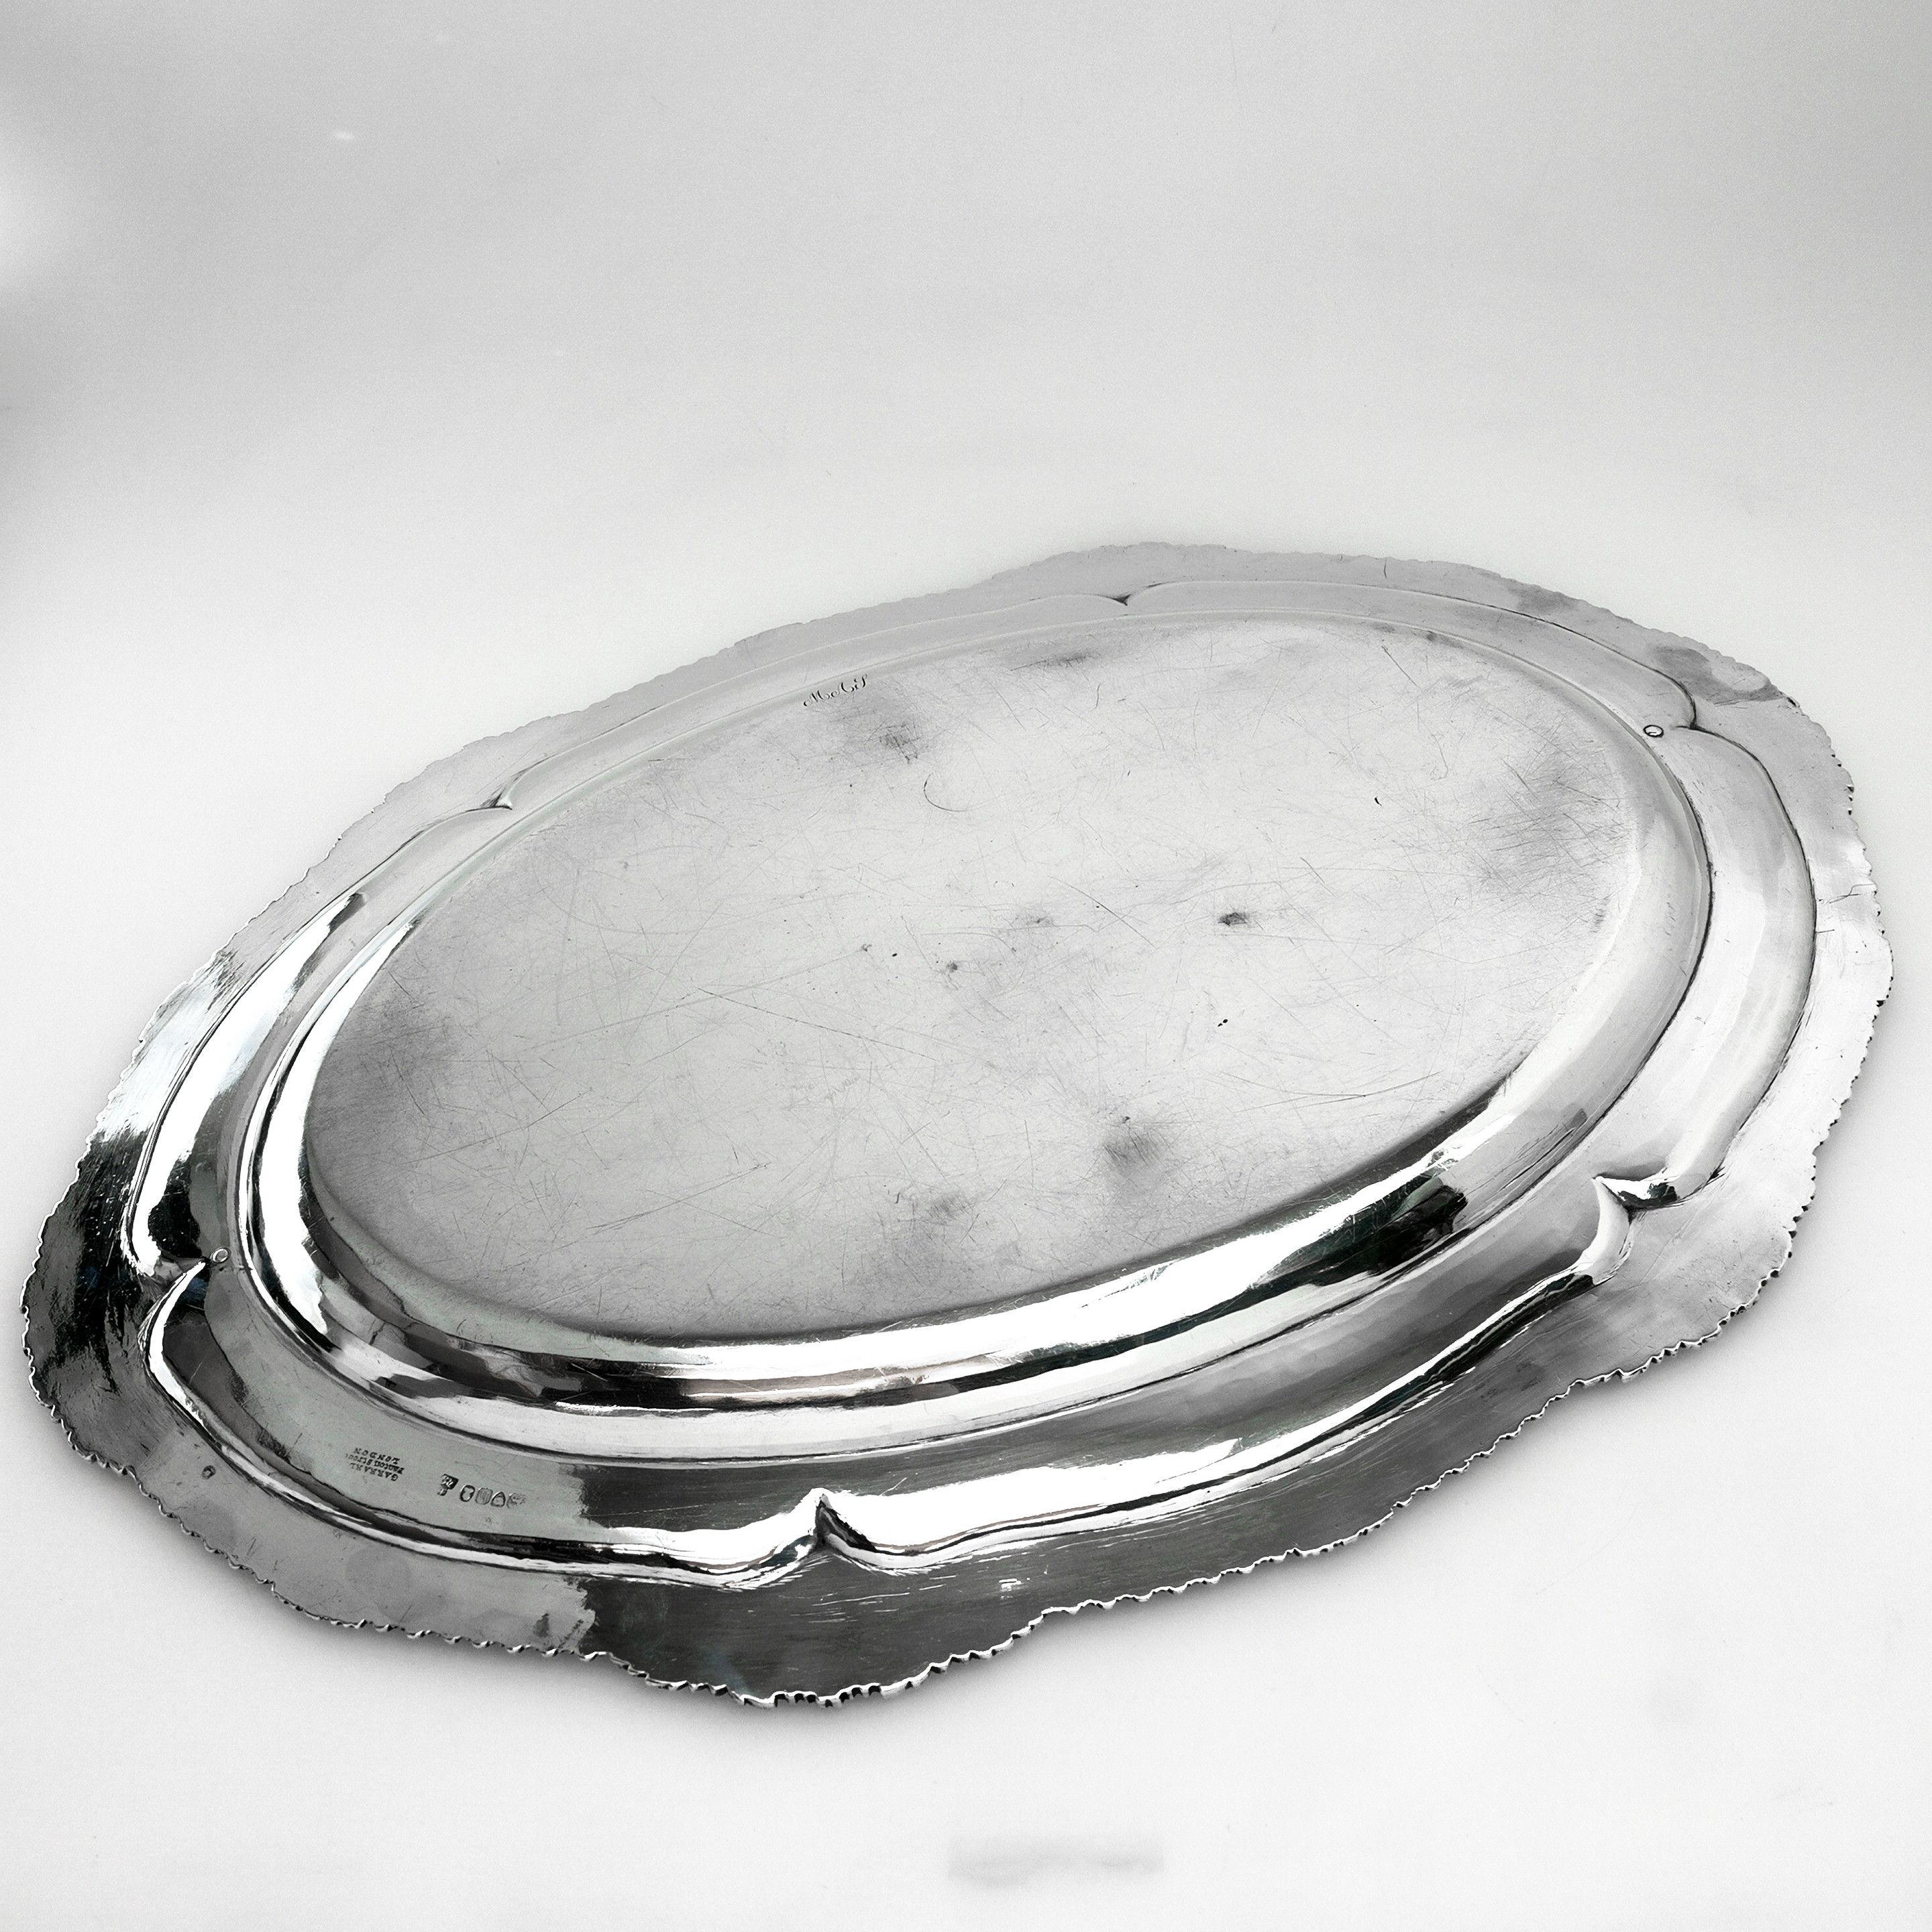 English Georgian Sterling Silver Antique Meat Dish / Serving Platter 1823 George IV For Sale